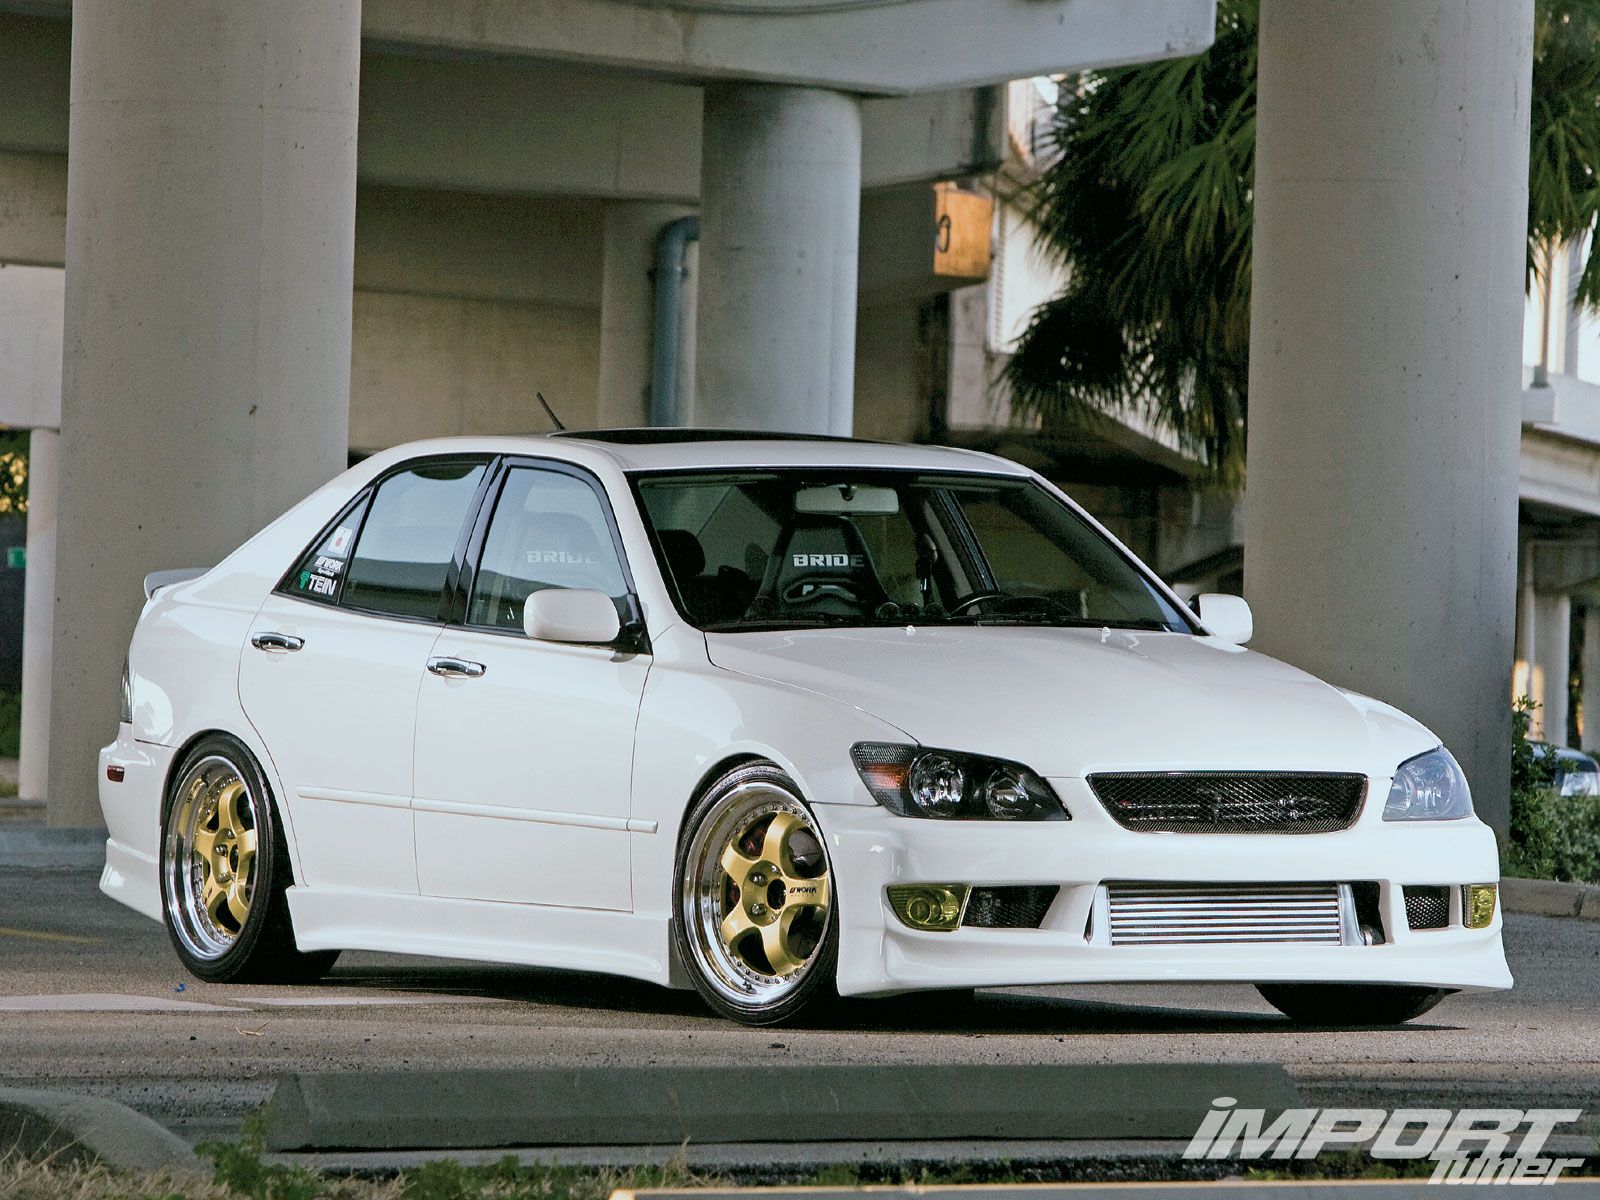 Is 300 - Page 2 - Club Lexus Forums